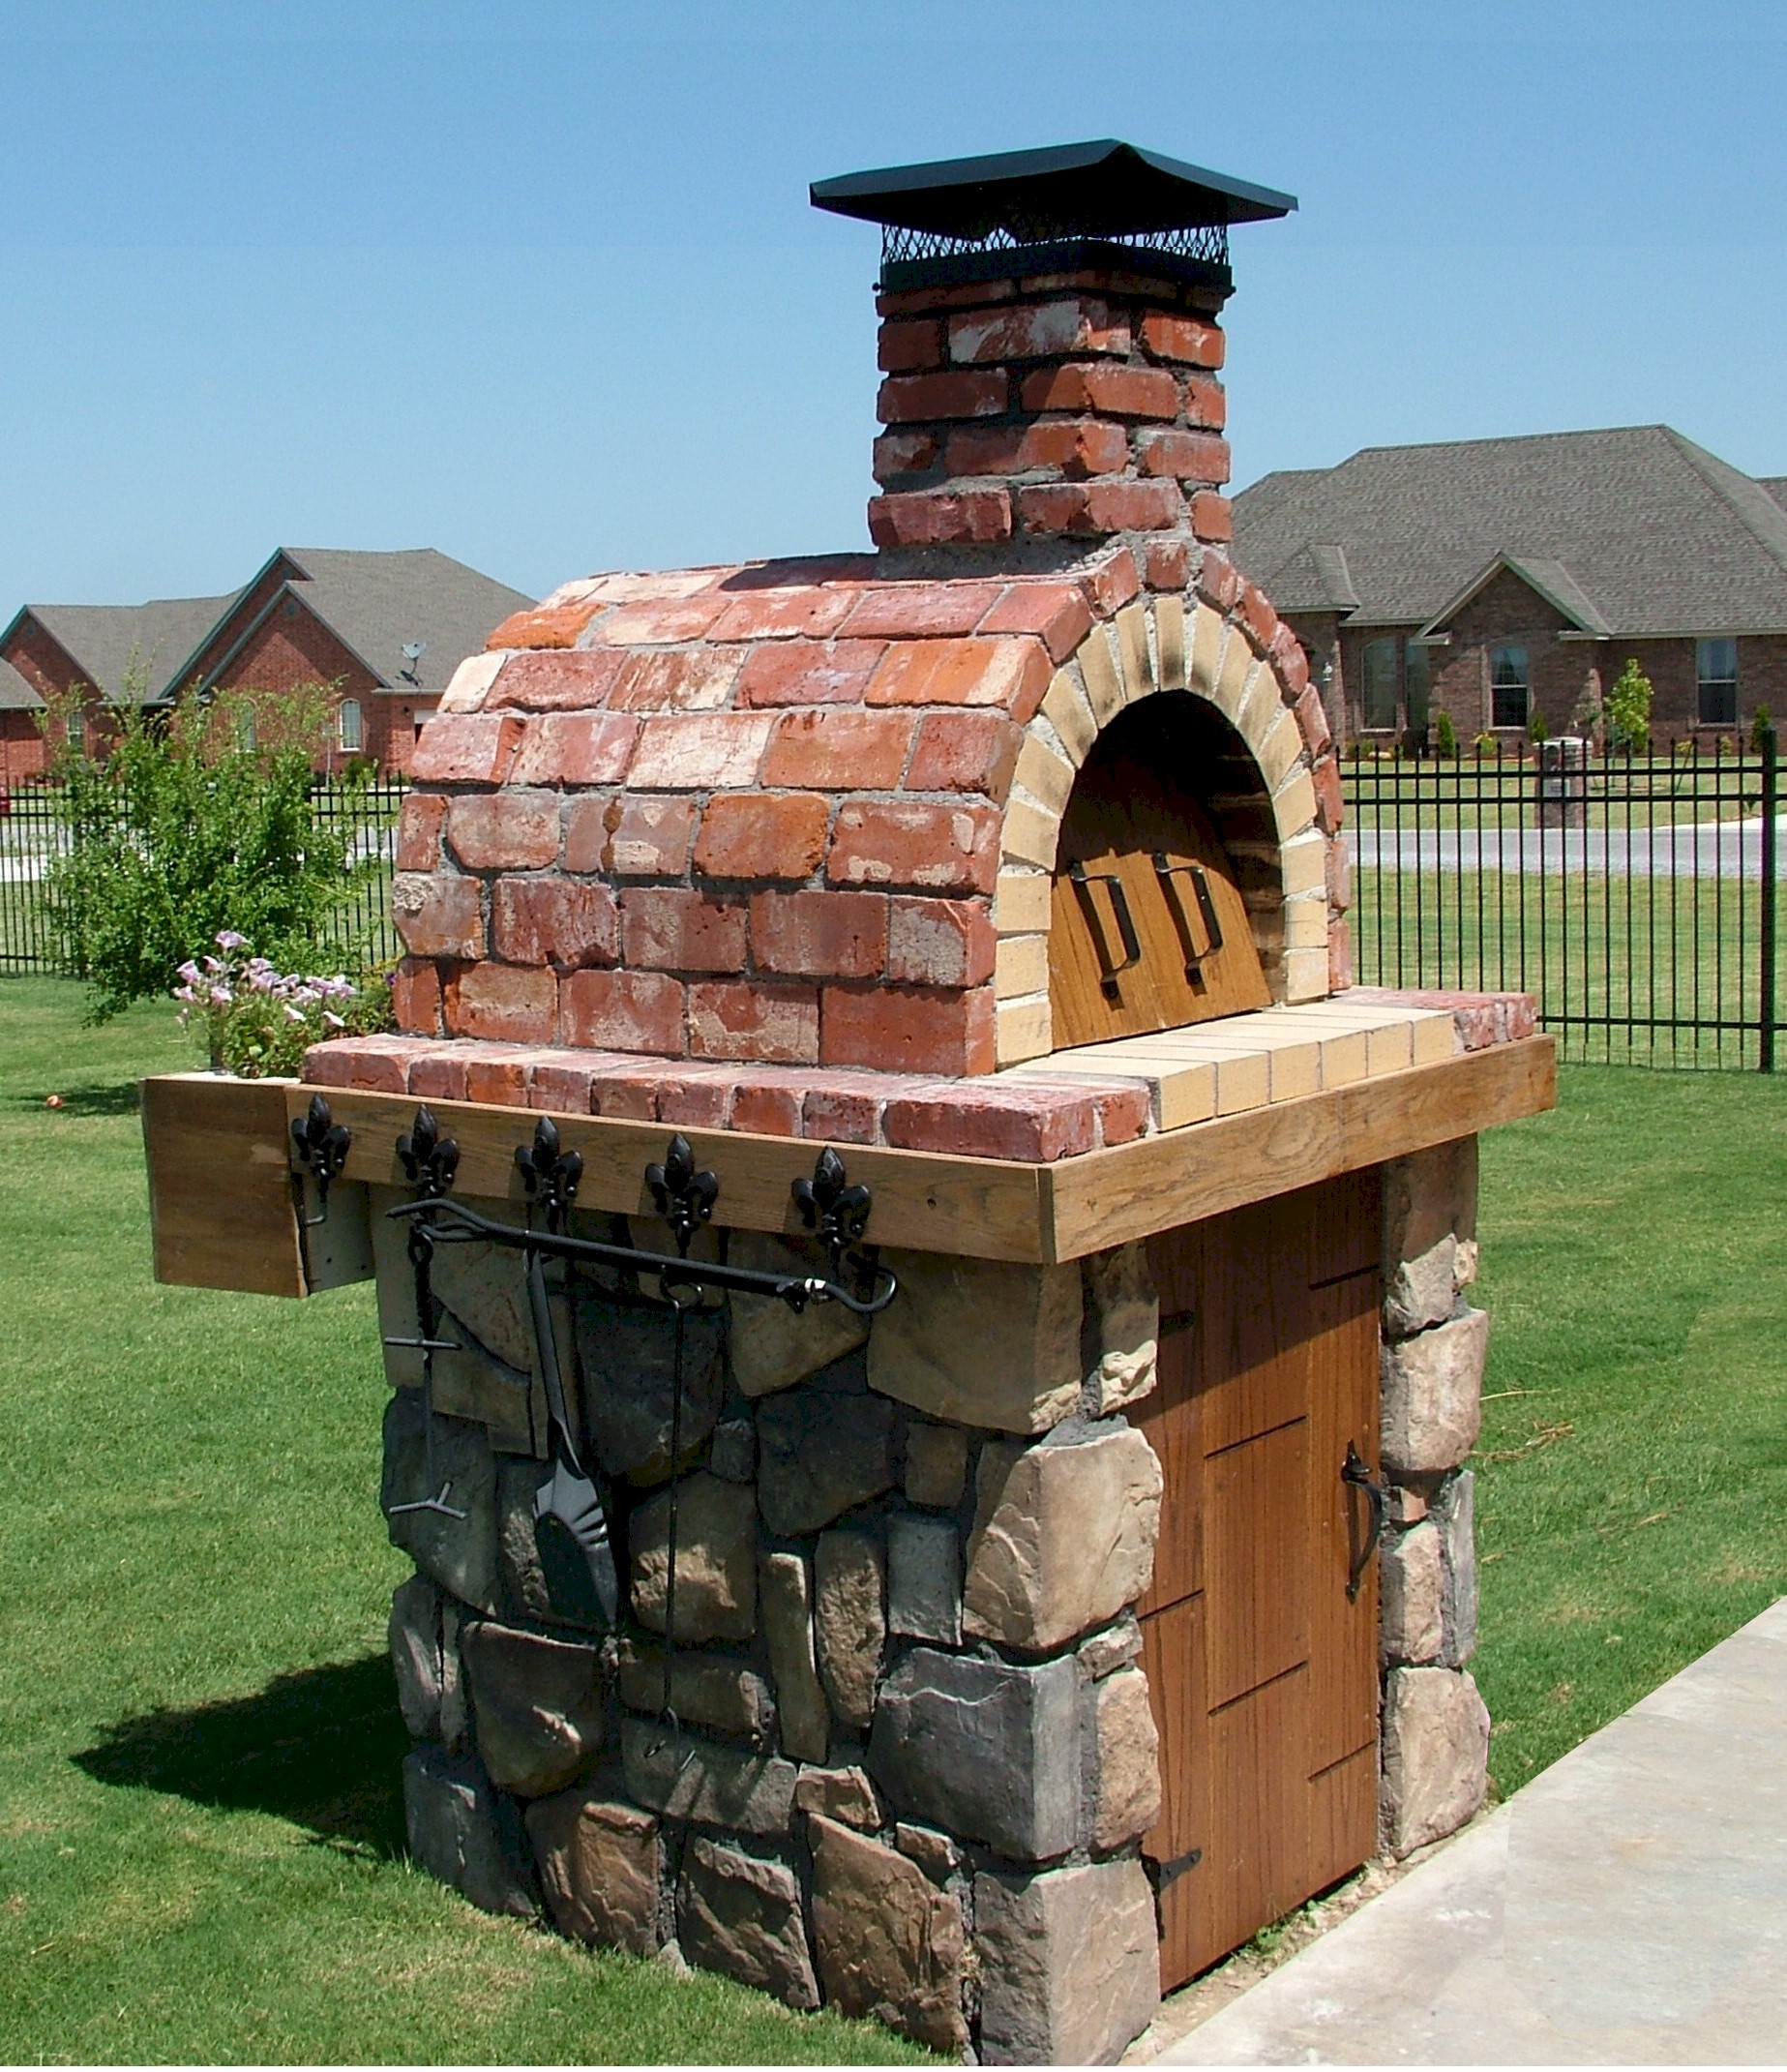 Outdoor Wood Oven DIY
 DIY Wood Fired Outdoor Brick Pizza Ovens Are Not ly Easy